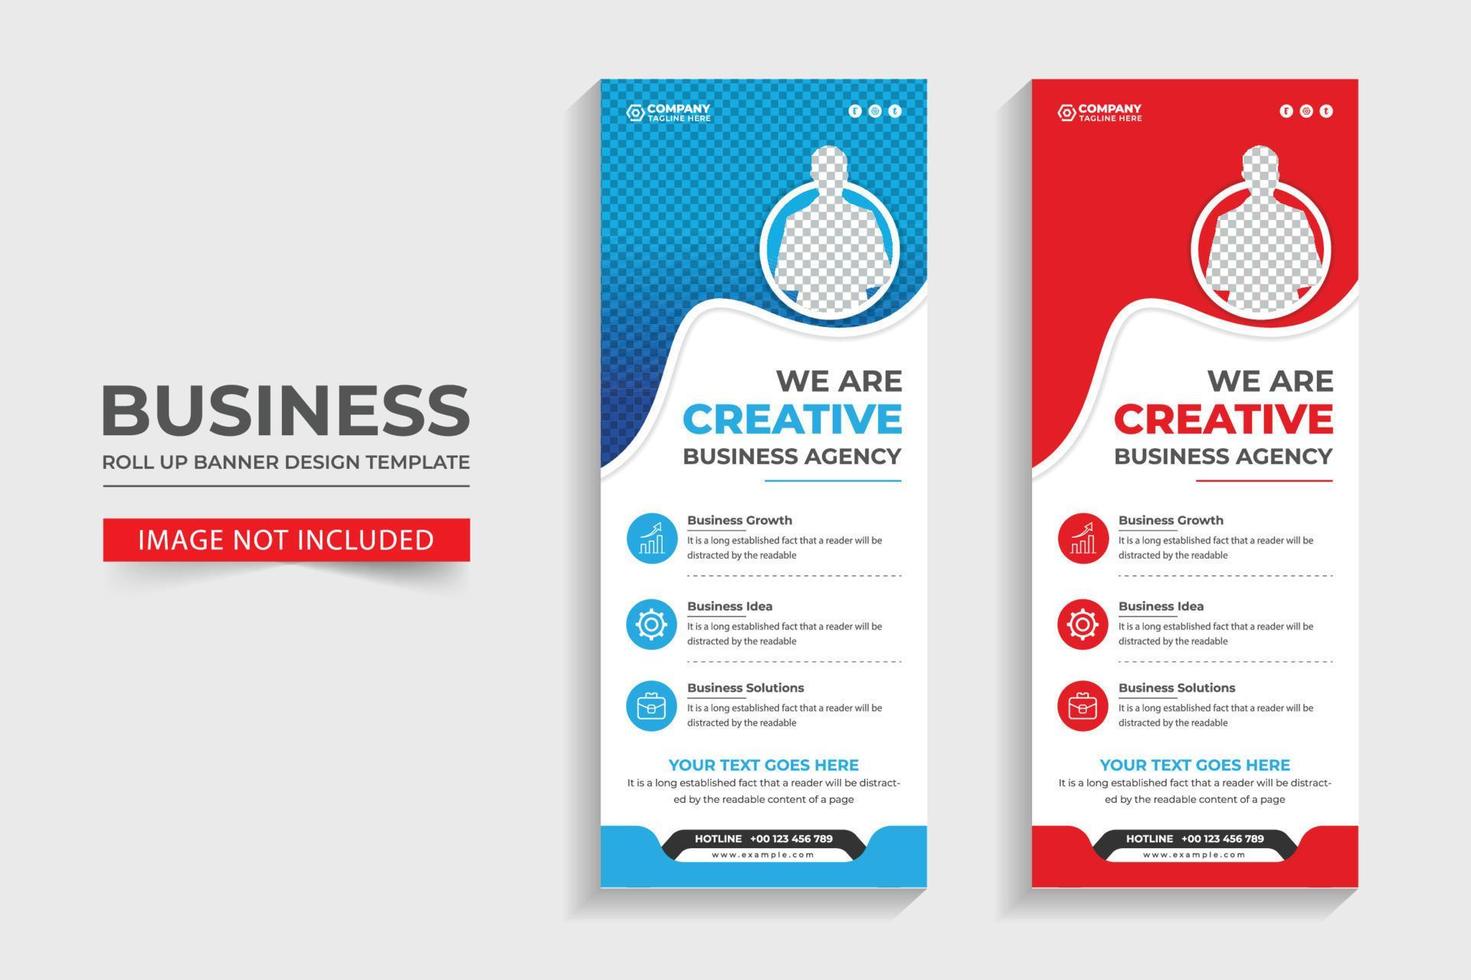 Creative business agency roll up banner design or pull up banner template design vector